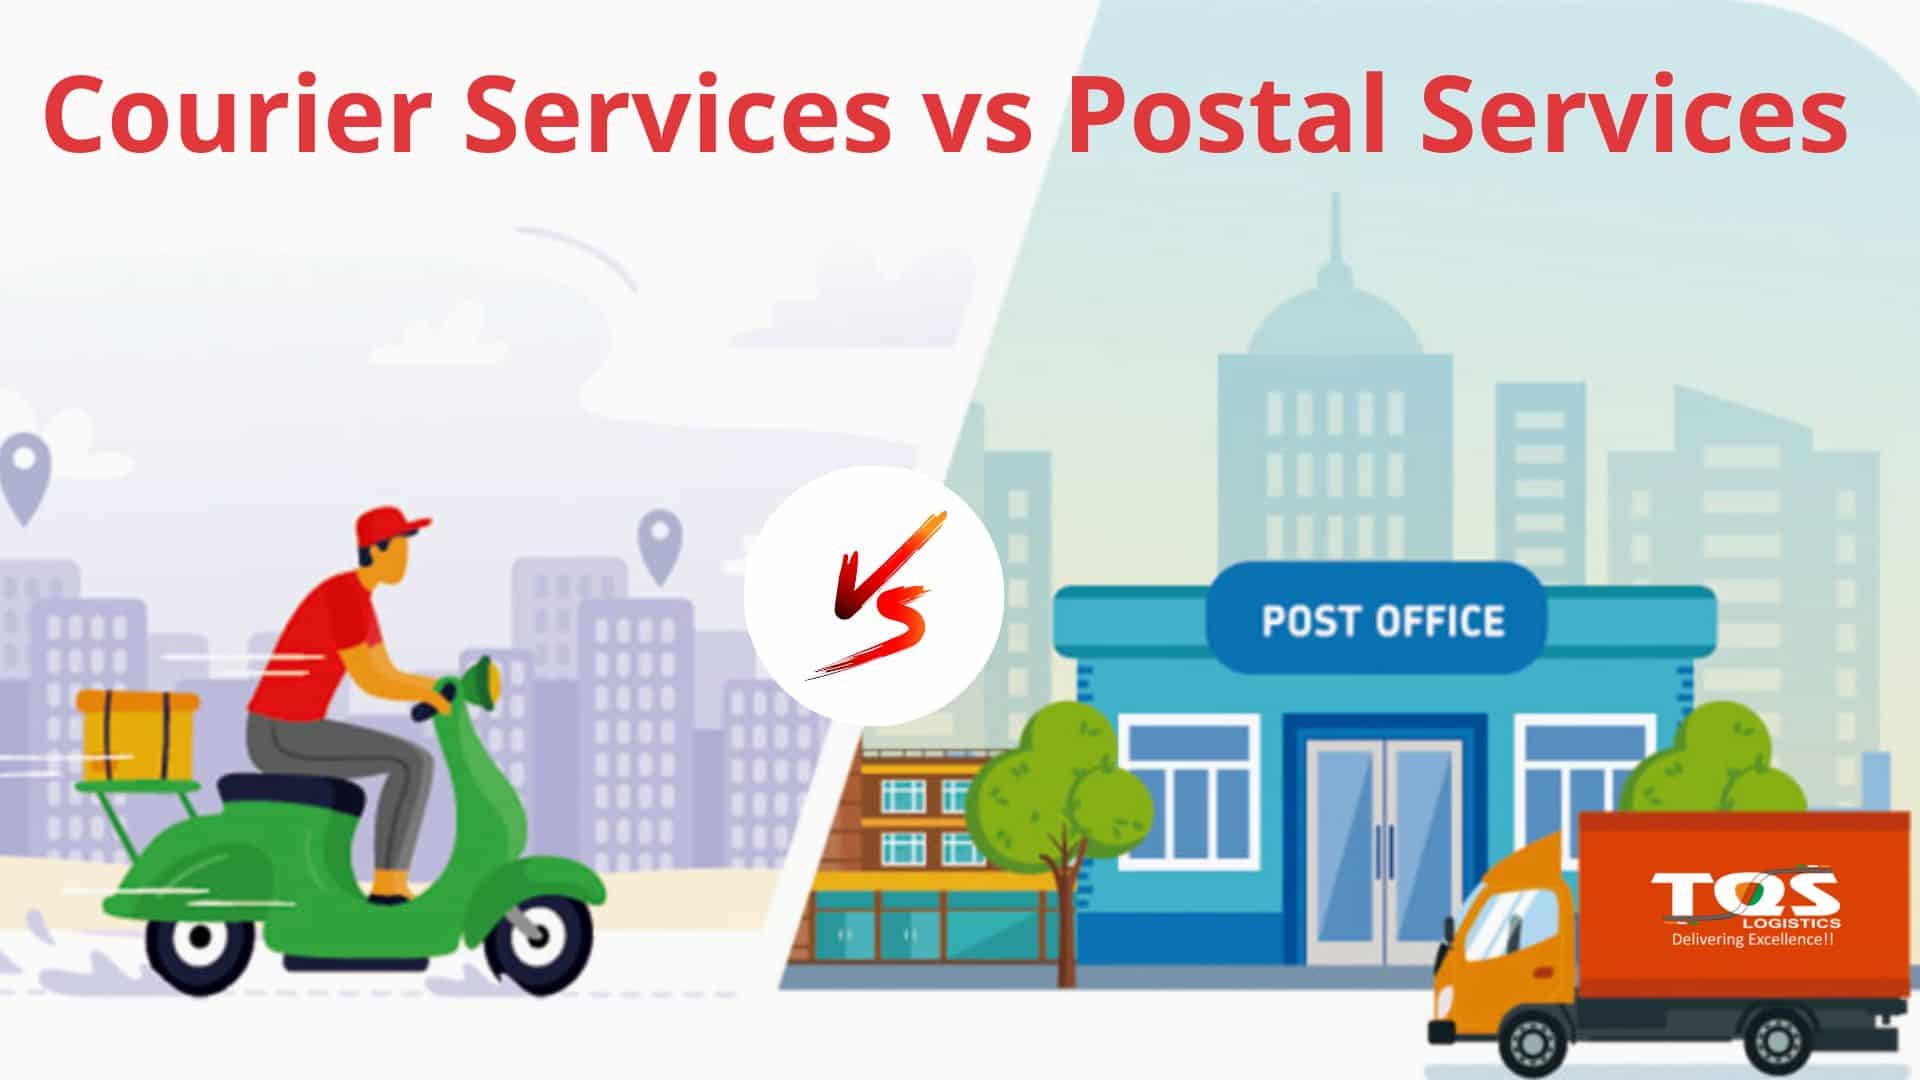 What Are the Benefits of Courier Services vs. Postal Services for Your eCommerce Business?